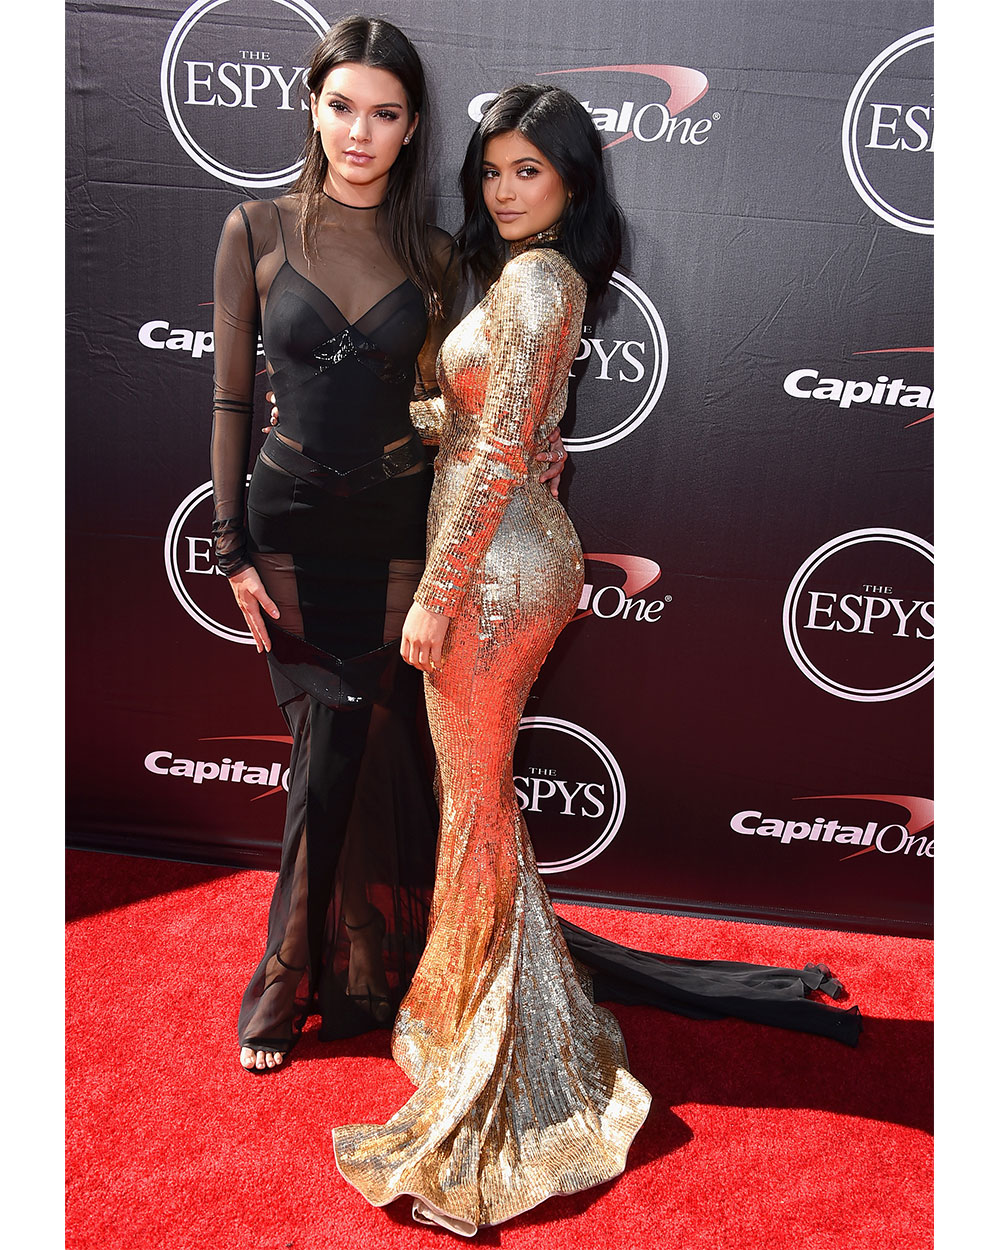 Kendall and Kylie Jenner at the ESPYS wearing Alexandre Vaulthier (Kendall) and Shady Zeineldine (Kylie). Photo / Getty Images